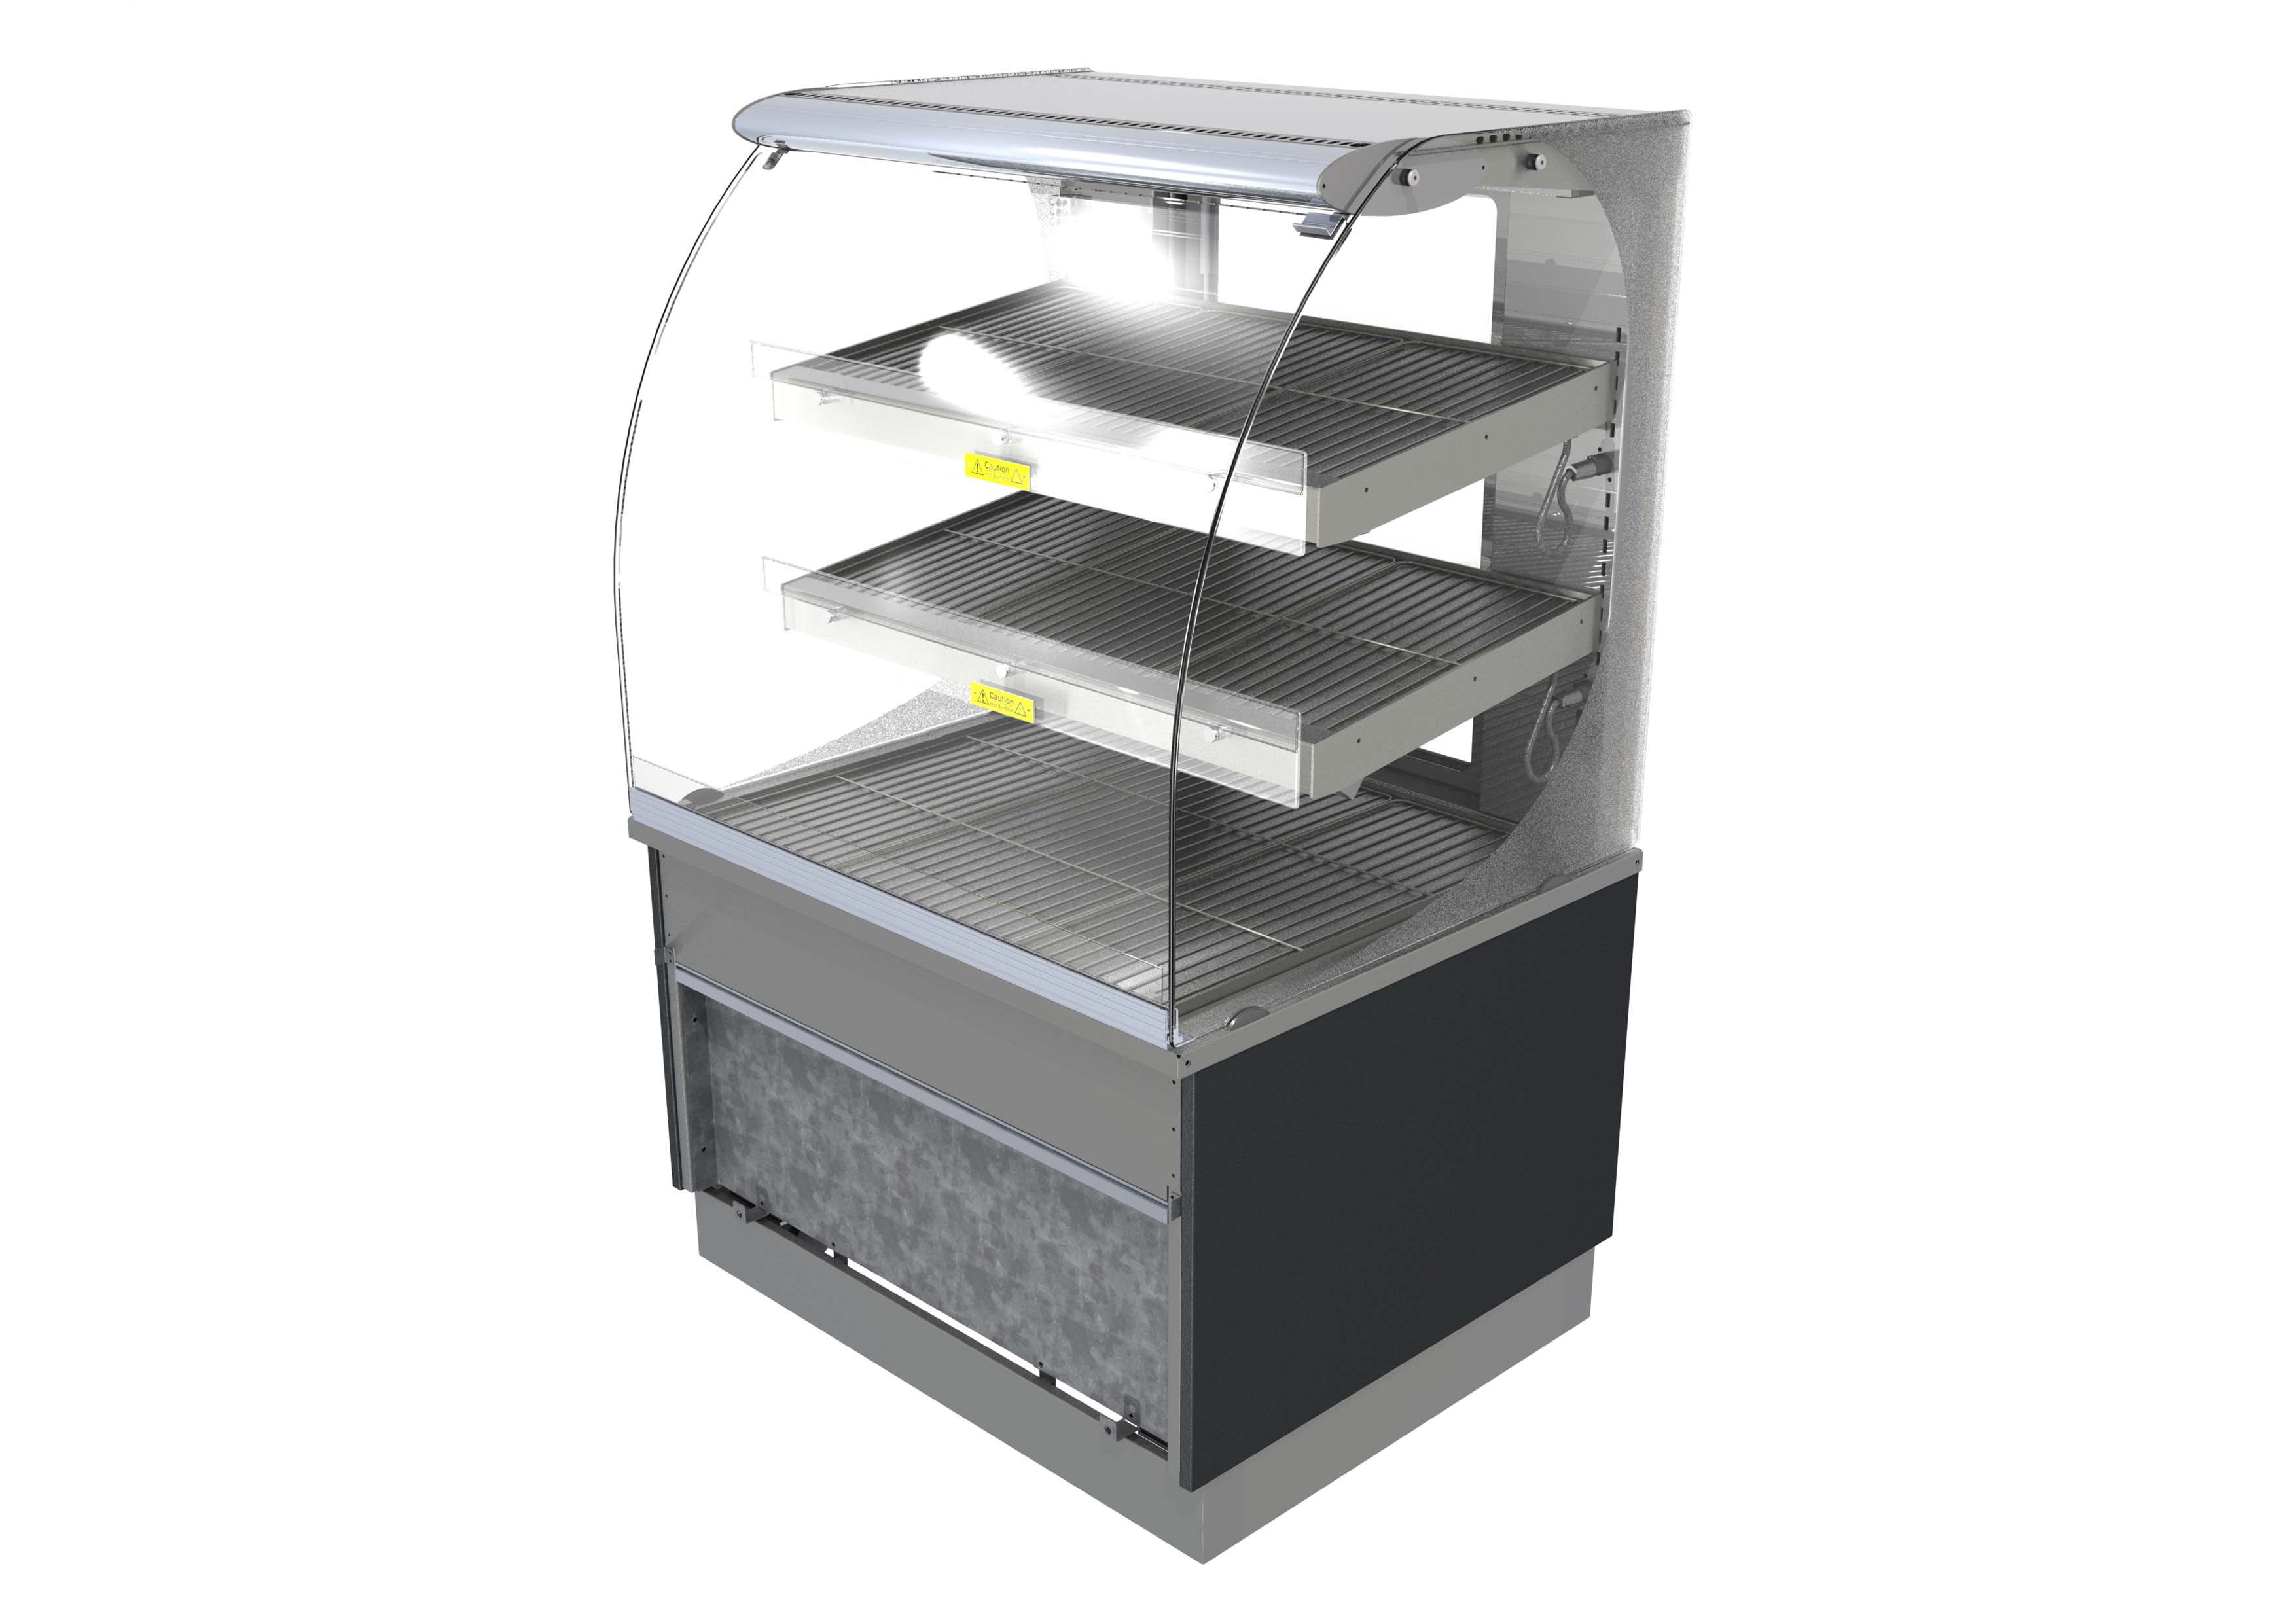 Designline Assisted Service Heated Patisserie (Rear Doors) (PH6,9,12AS)